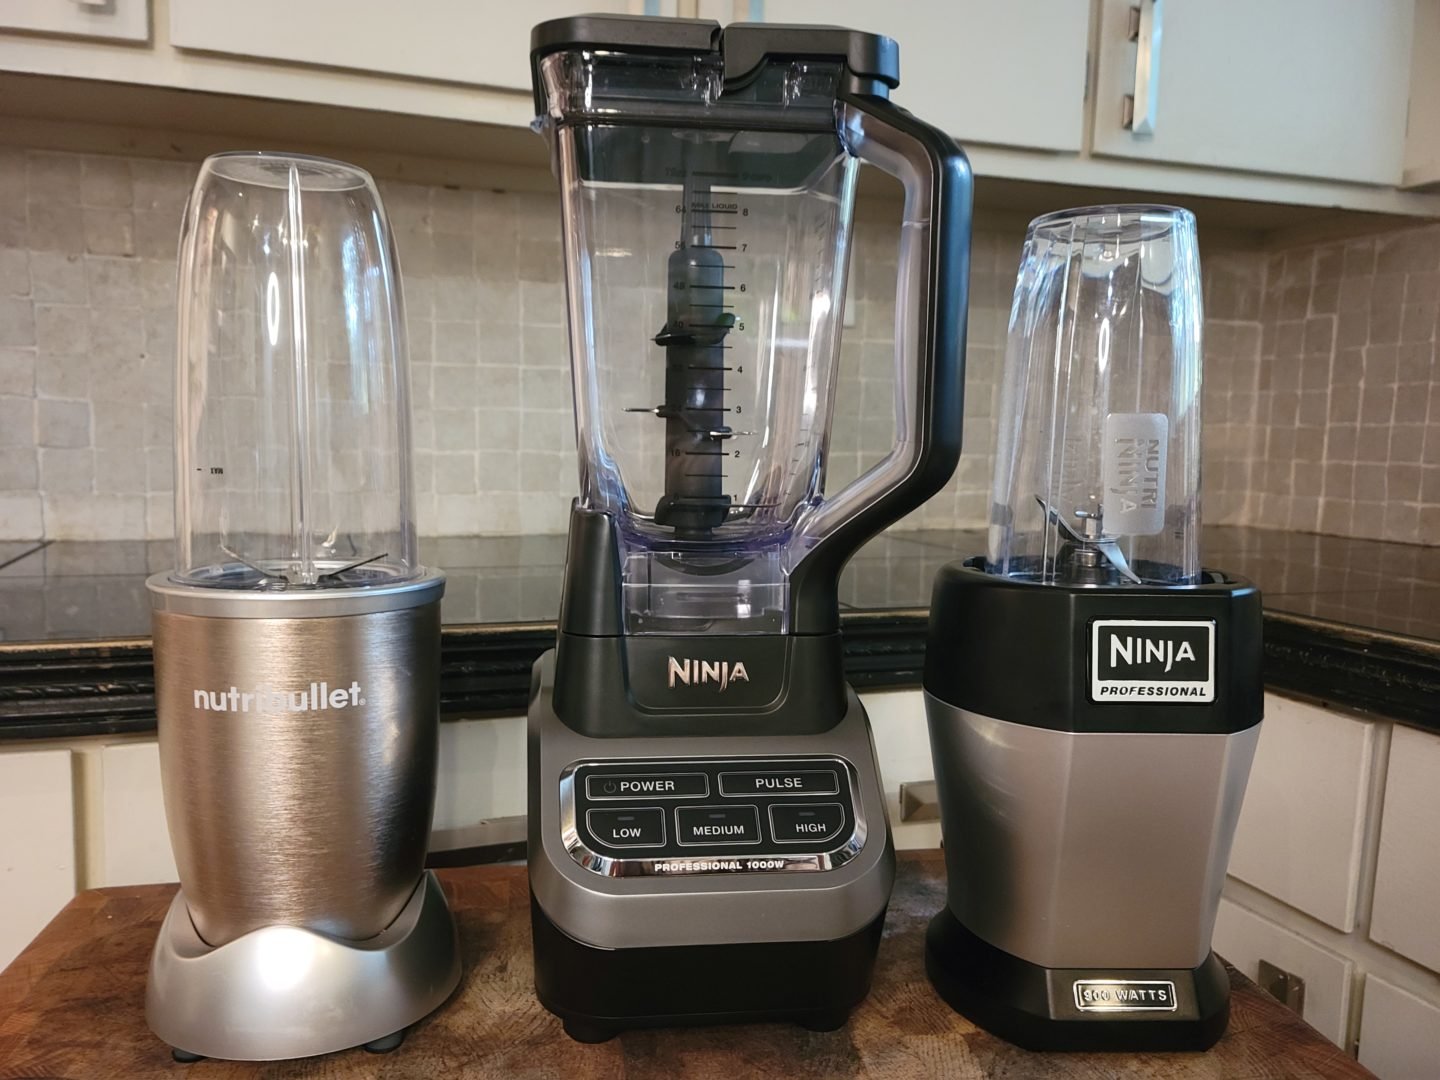 https://tastylicious.com/wp-content/uploads/2018/07/blenders-for-smoothies.jpeg